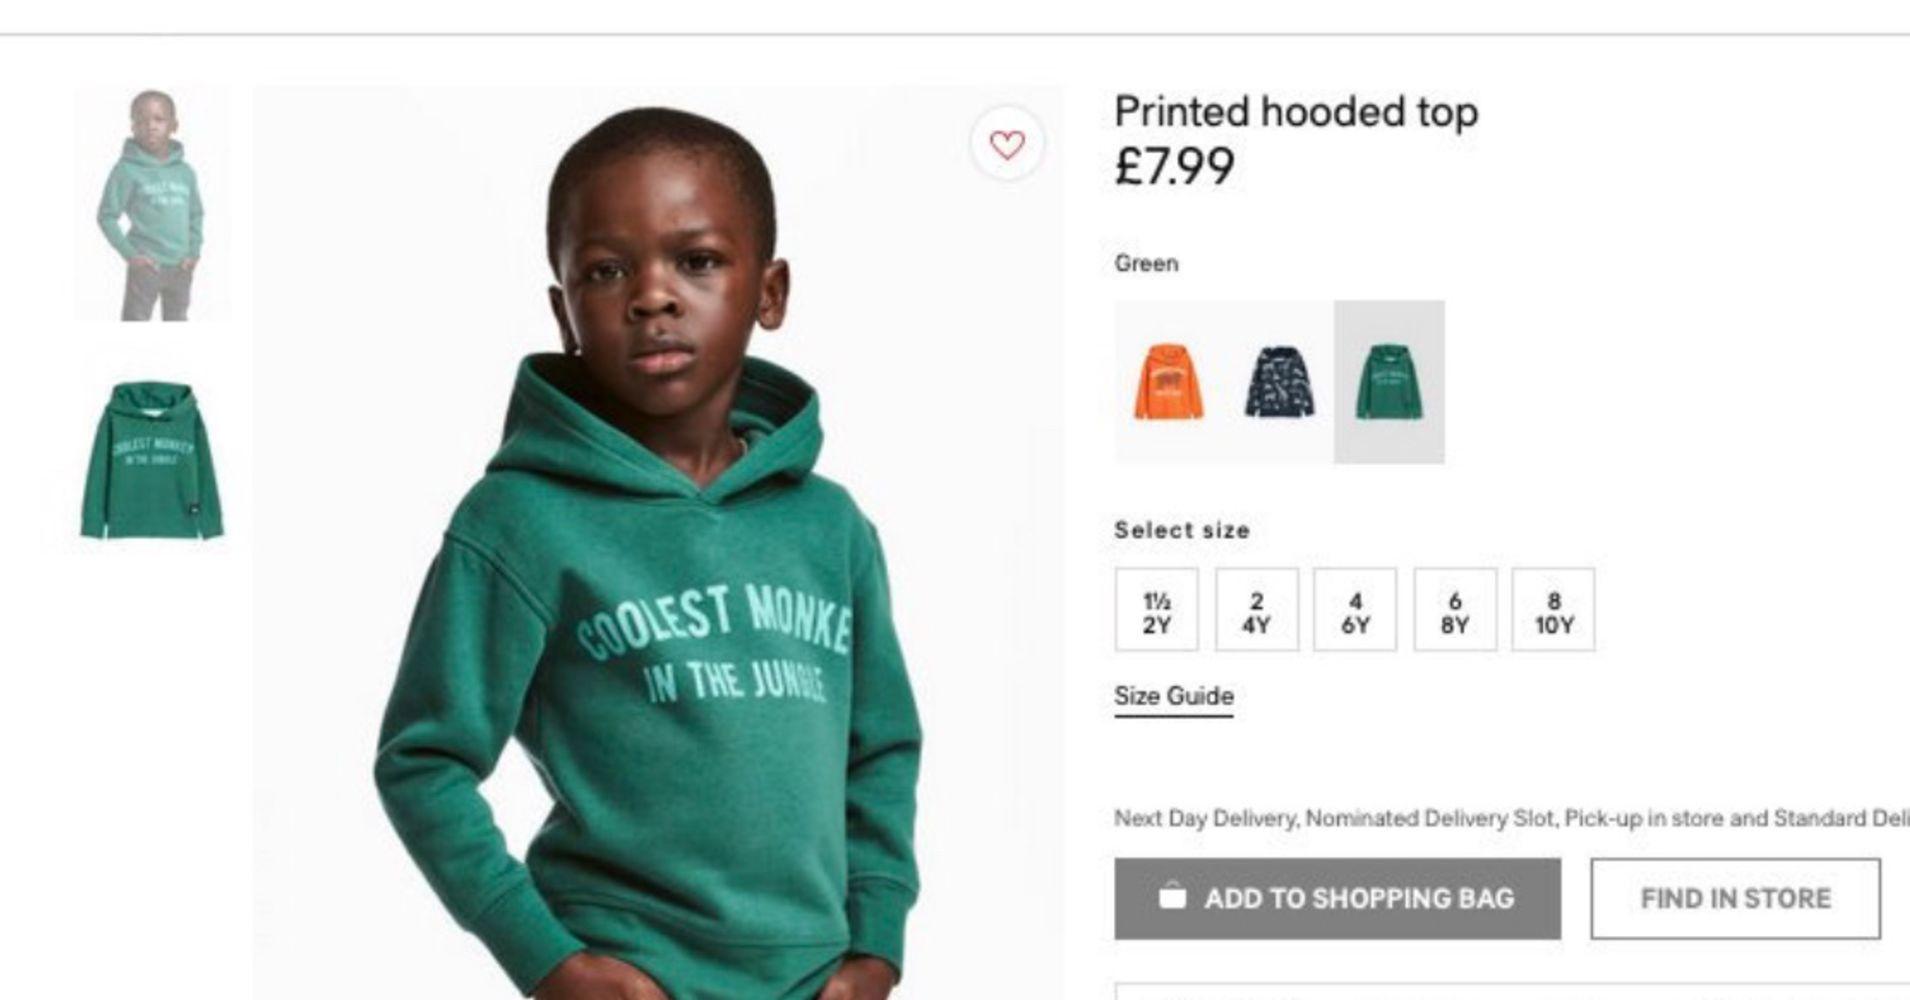 H&M Clothing Logo - H&M slammed as racist for 'monkey in the jungle' hoodie